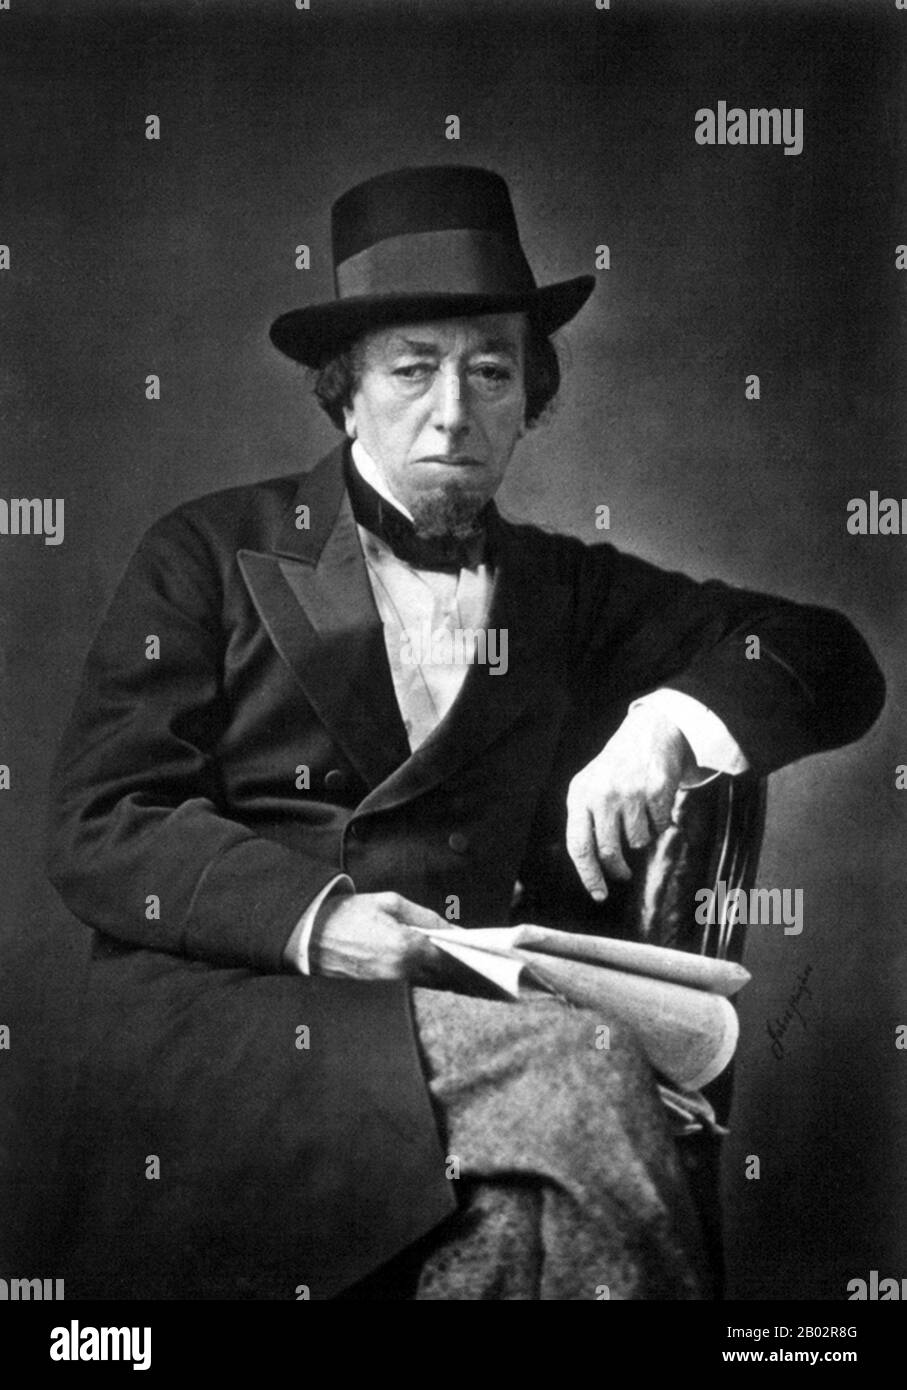 Benjamin Disraeli, 1st Earl of Beaconsfield, KG, PC, FRS, (21 December 1804 – 19 April 1881) was a British Conservative politician, writer and aristocrat who twice served as Prime Minister. He played a central role in the creation of the modern Conservative Party, defining its policies and its broad outreach.  Disraeli is remembered for his influential voice in world affairs, his political battles with the Liberal leader William Ewart Gladstone, and his one-nation conservatism or 'Tory democracy'. He made the Conservatives the party most identified with the glory and power of the British Empir Stock Photo